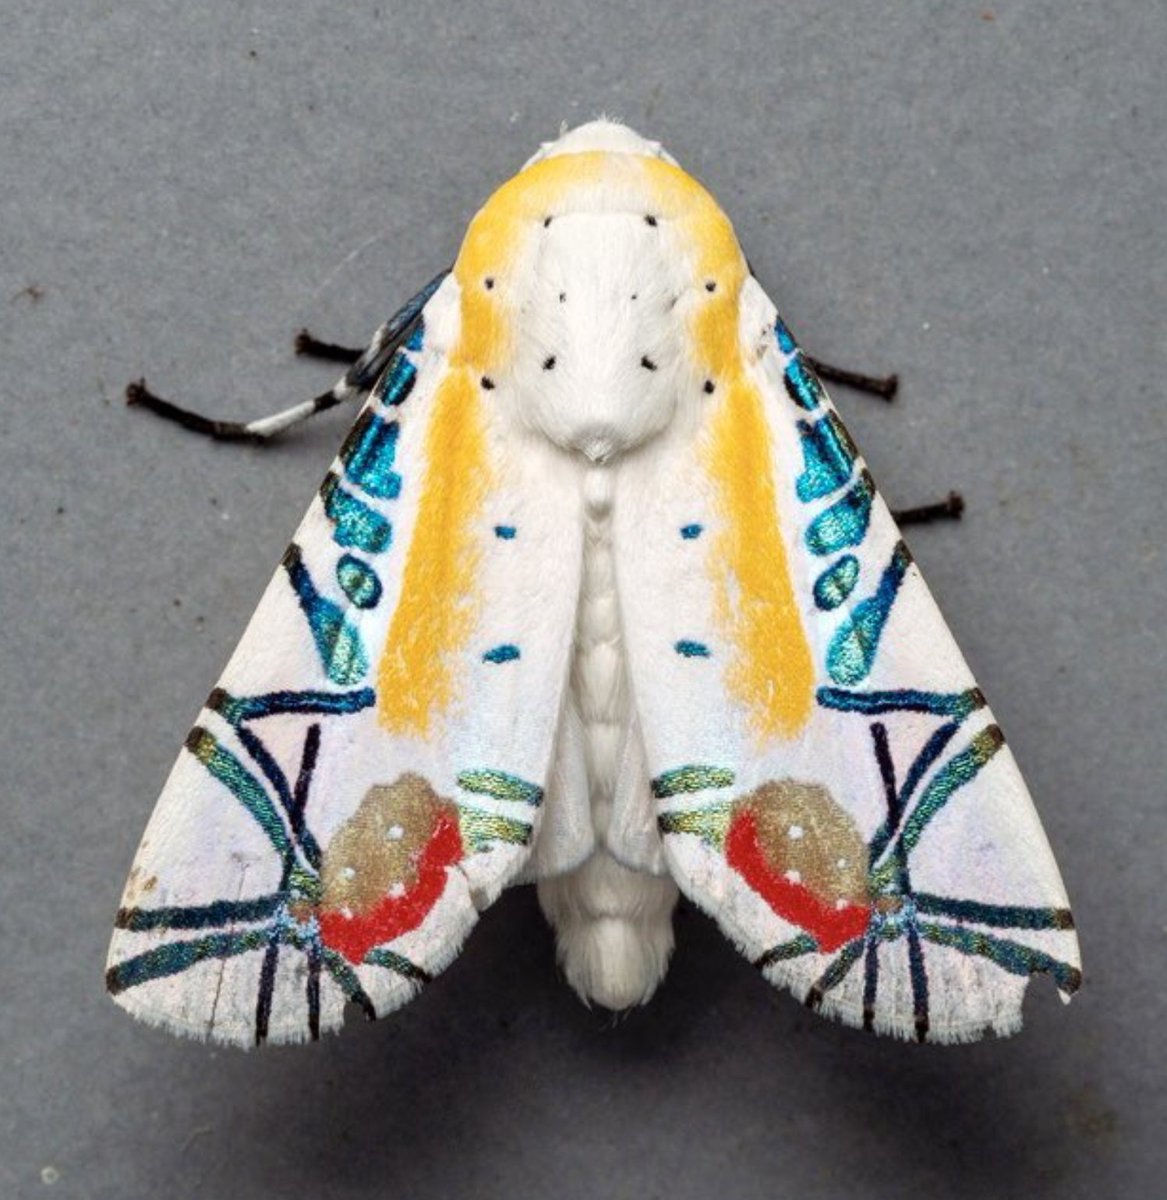 #NationalMothWeek day 9! The final moth of the week is the truly spectacular Picasso moth (Baorisa hieroglyphica). Considered to be one of the most beautiful moths in the world. Photo: msone #MothWeek